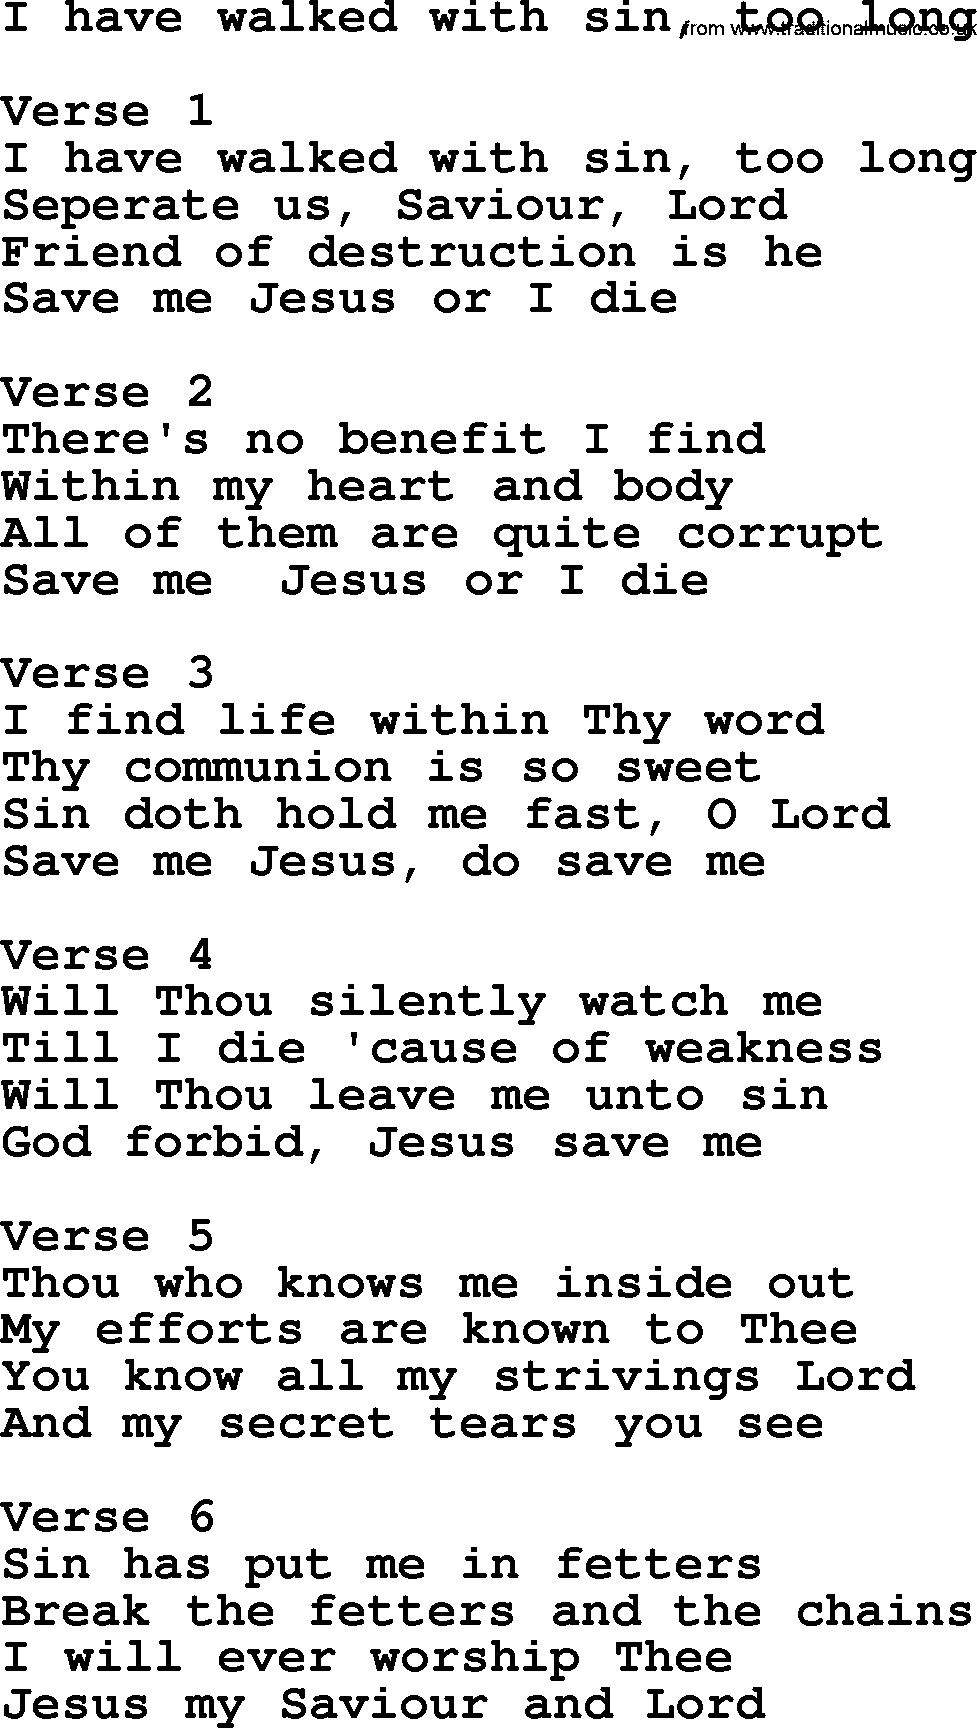 Apostolic and Pentecostal Hymns and Gospel Songs, Hymn: I Have Walked With Sin, Too Long, Christian lyrics and PDF